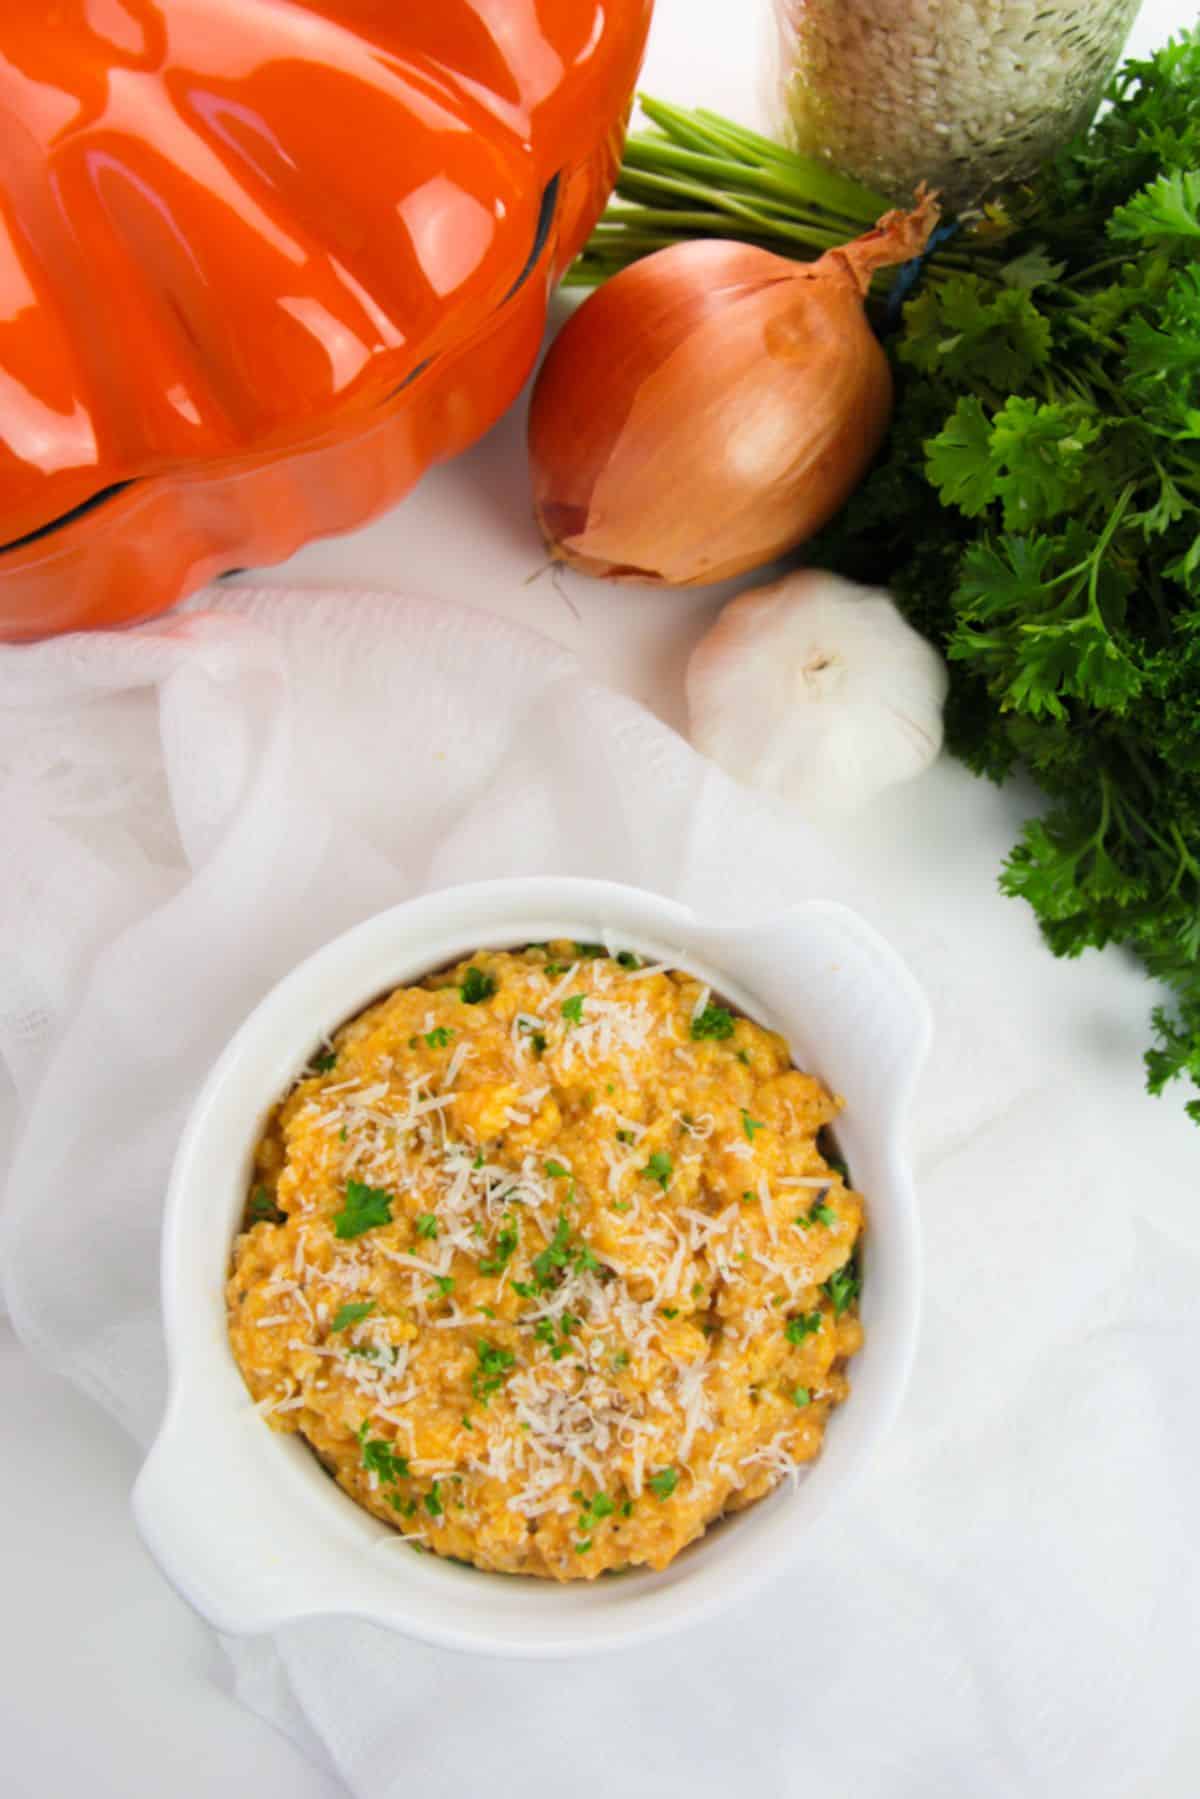 Overhead view of Pumpkin Risotto in a white bowl, garnished with parsley.